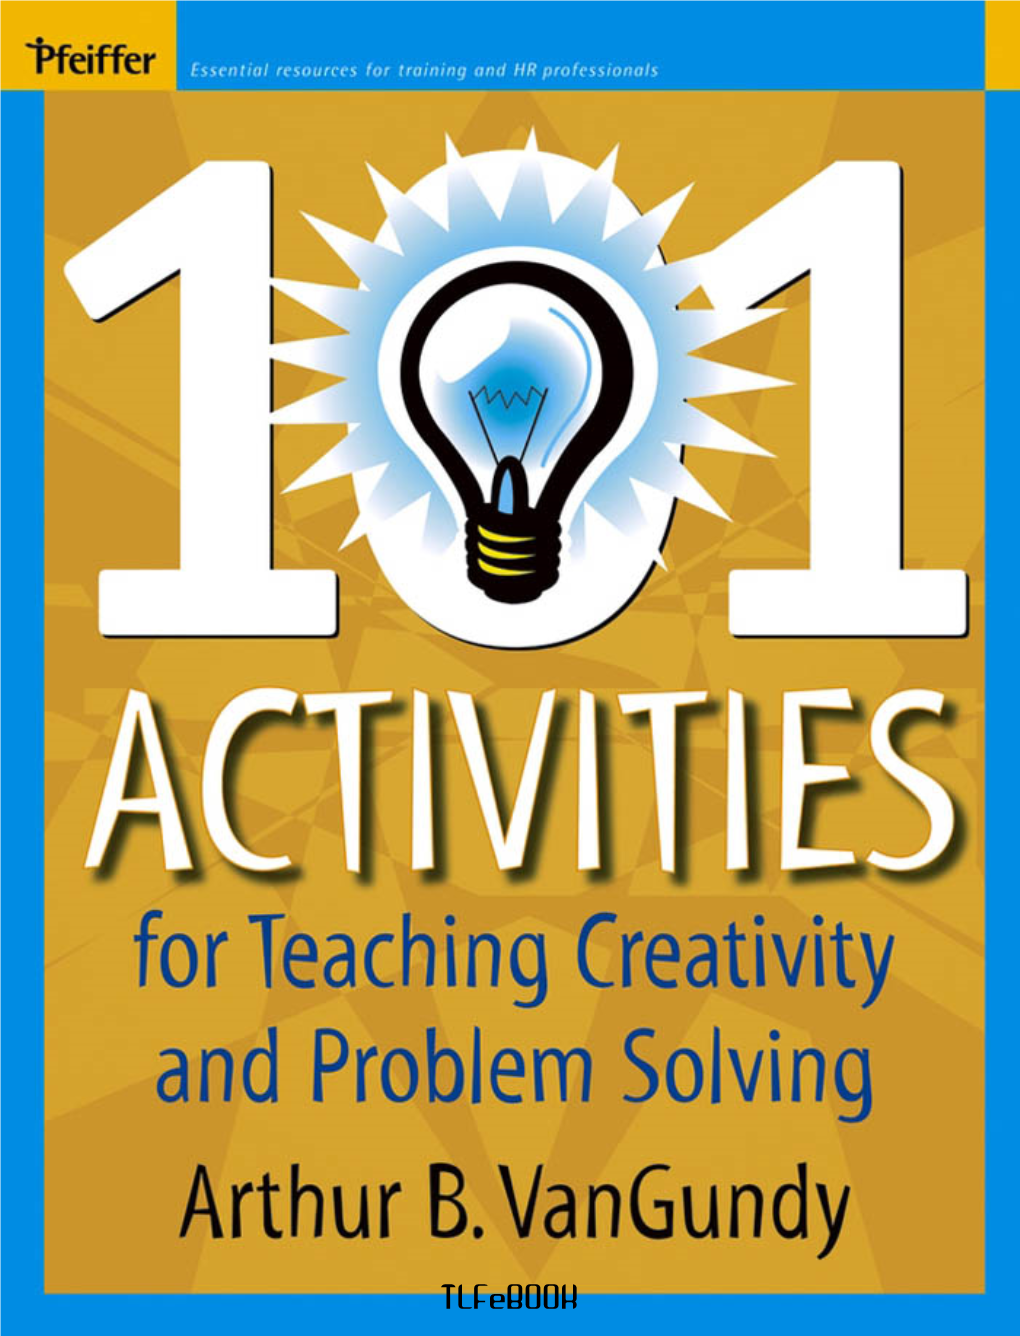 101 Activities for Teaching Creativity and Problem Solving LLLL